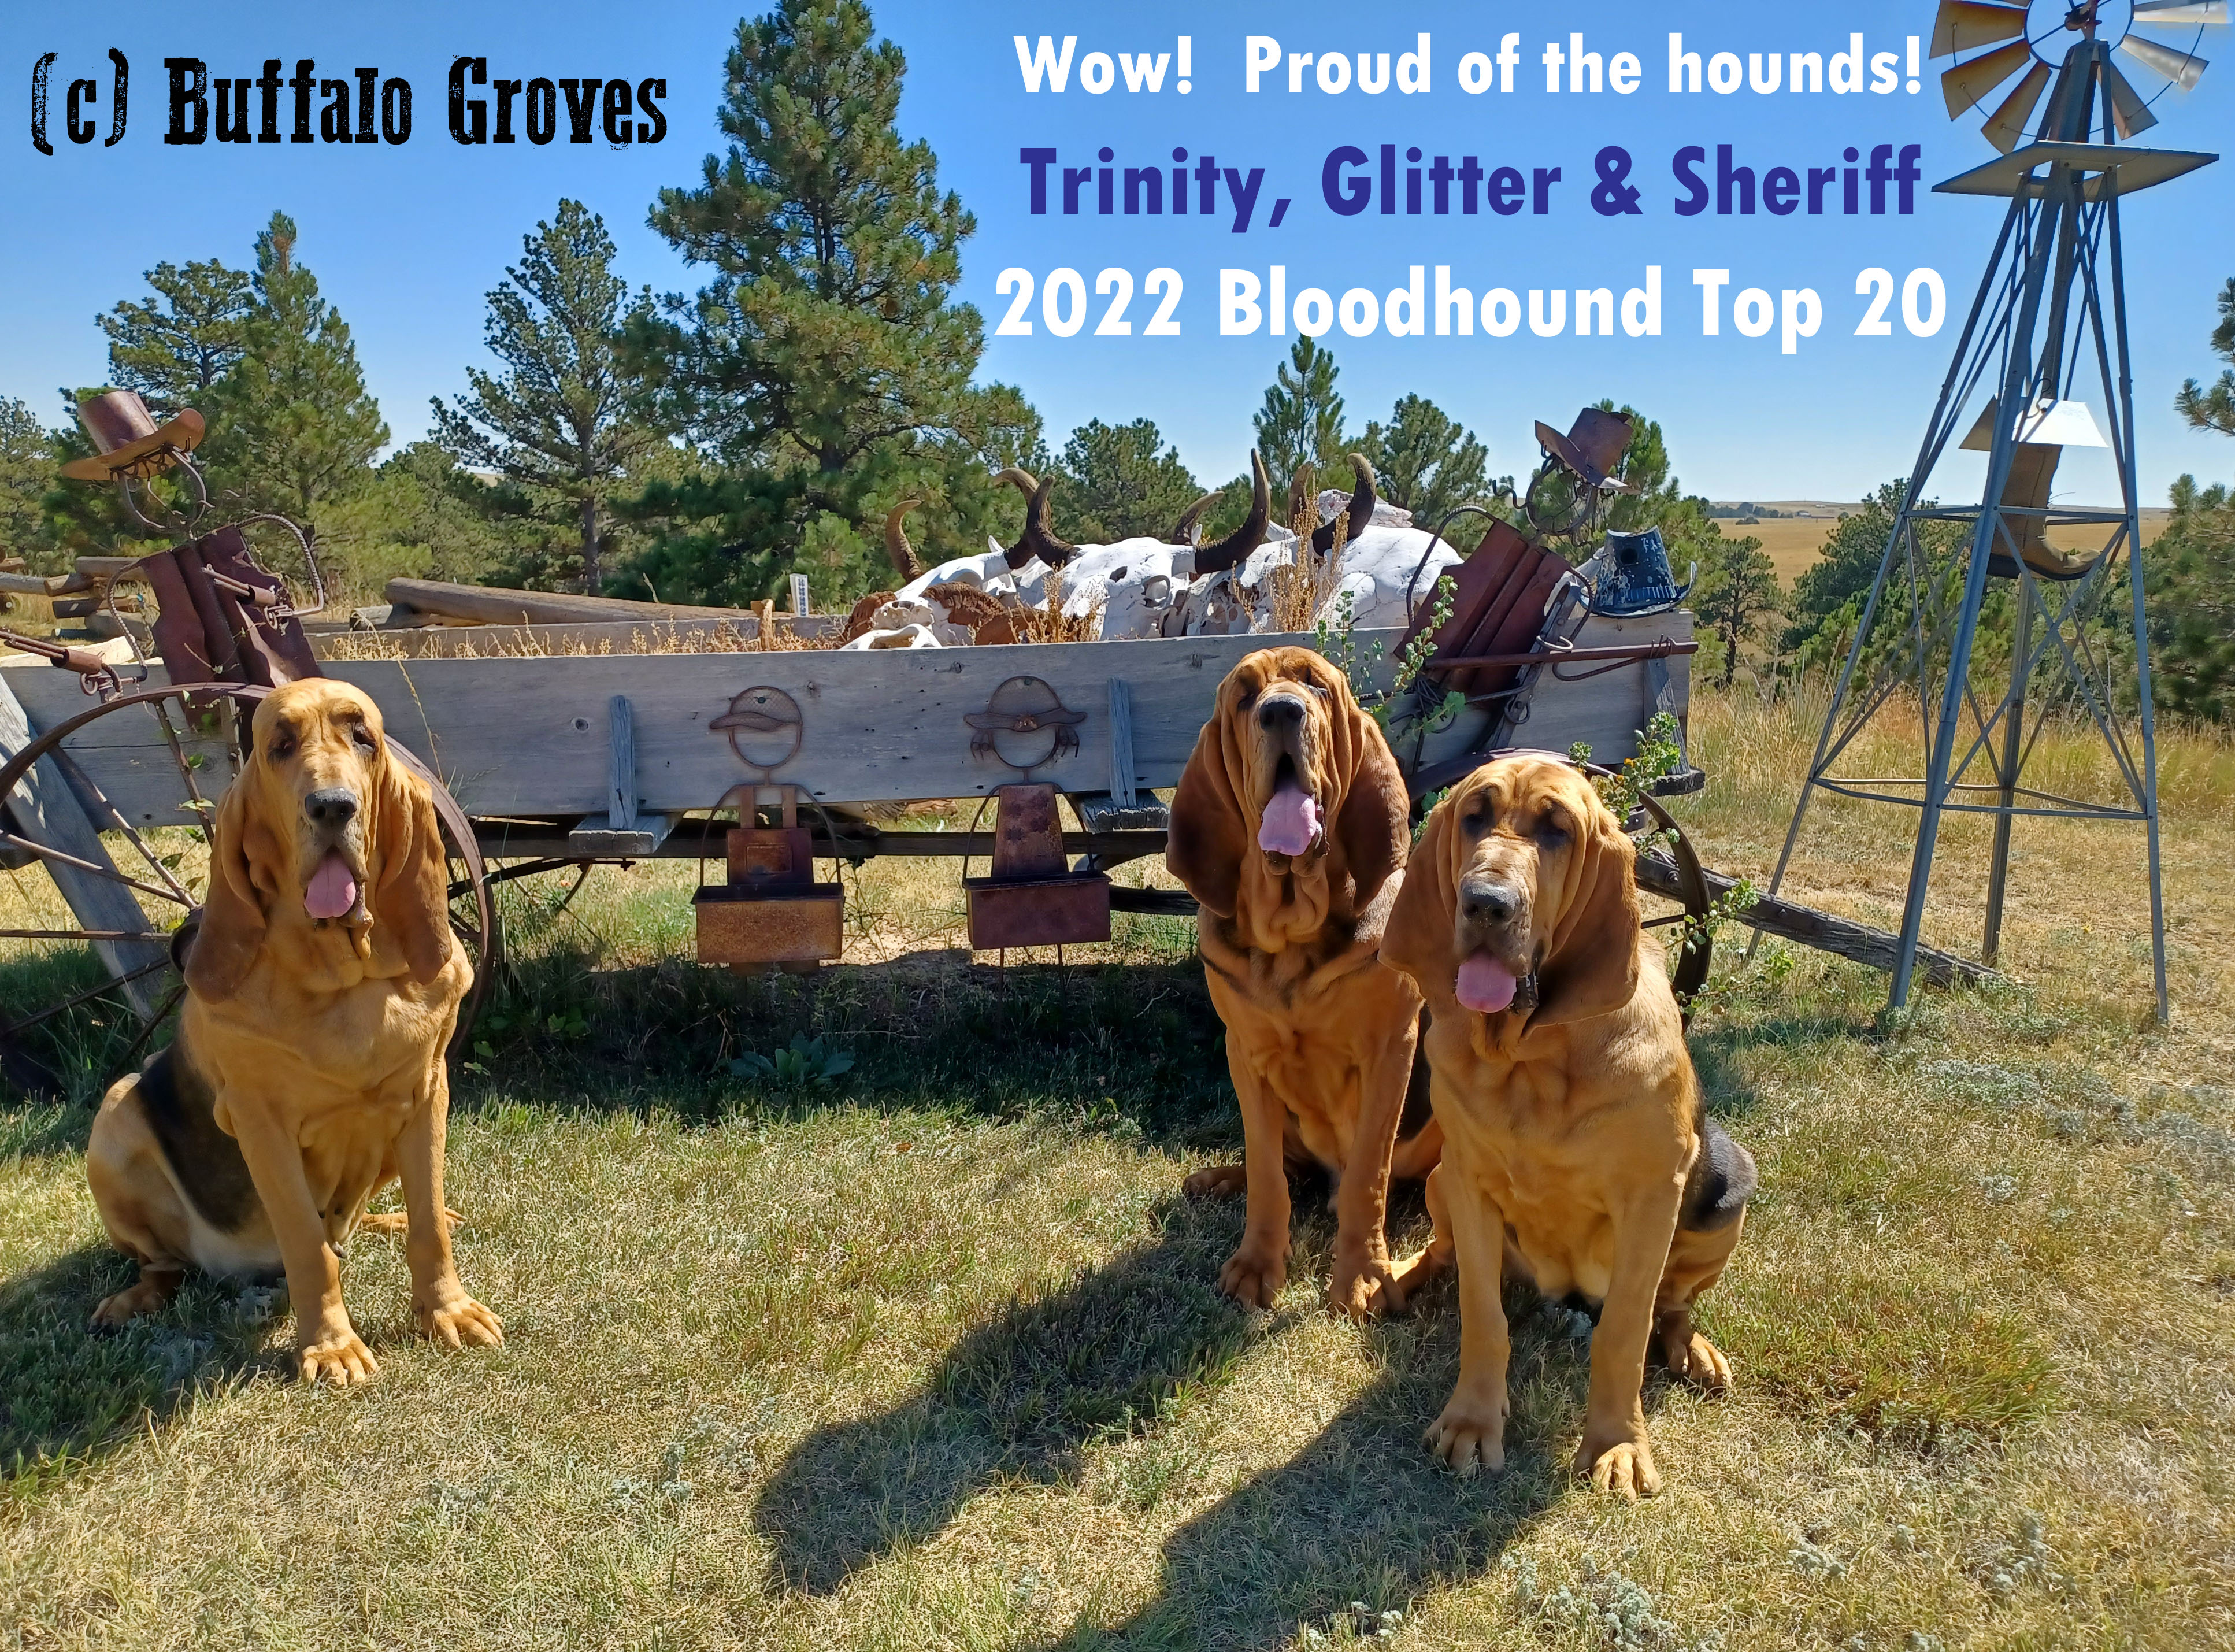 Bloodhounds in the AKC Hound Group